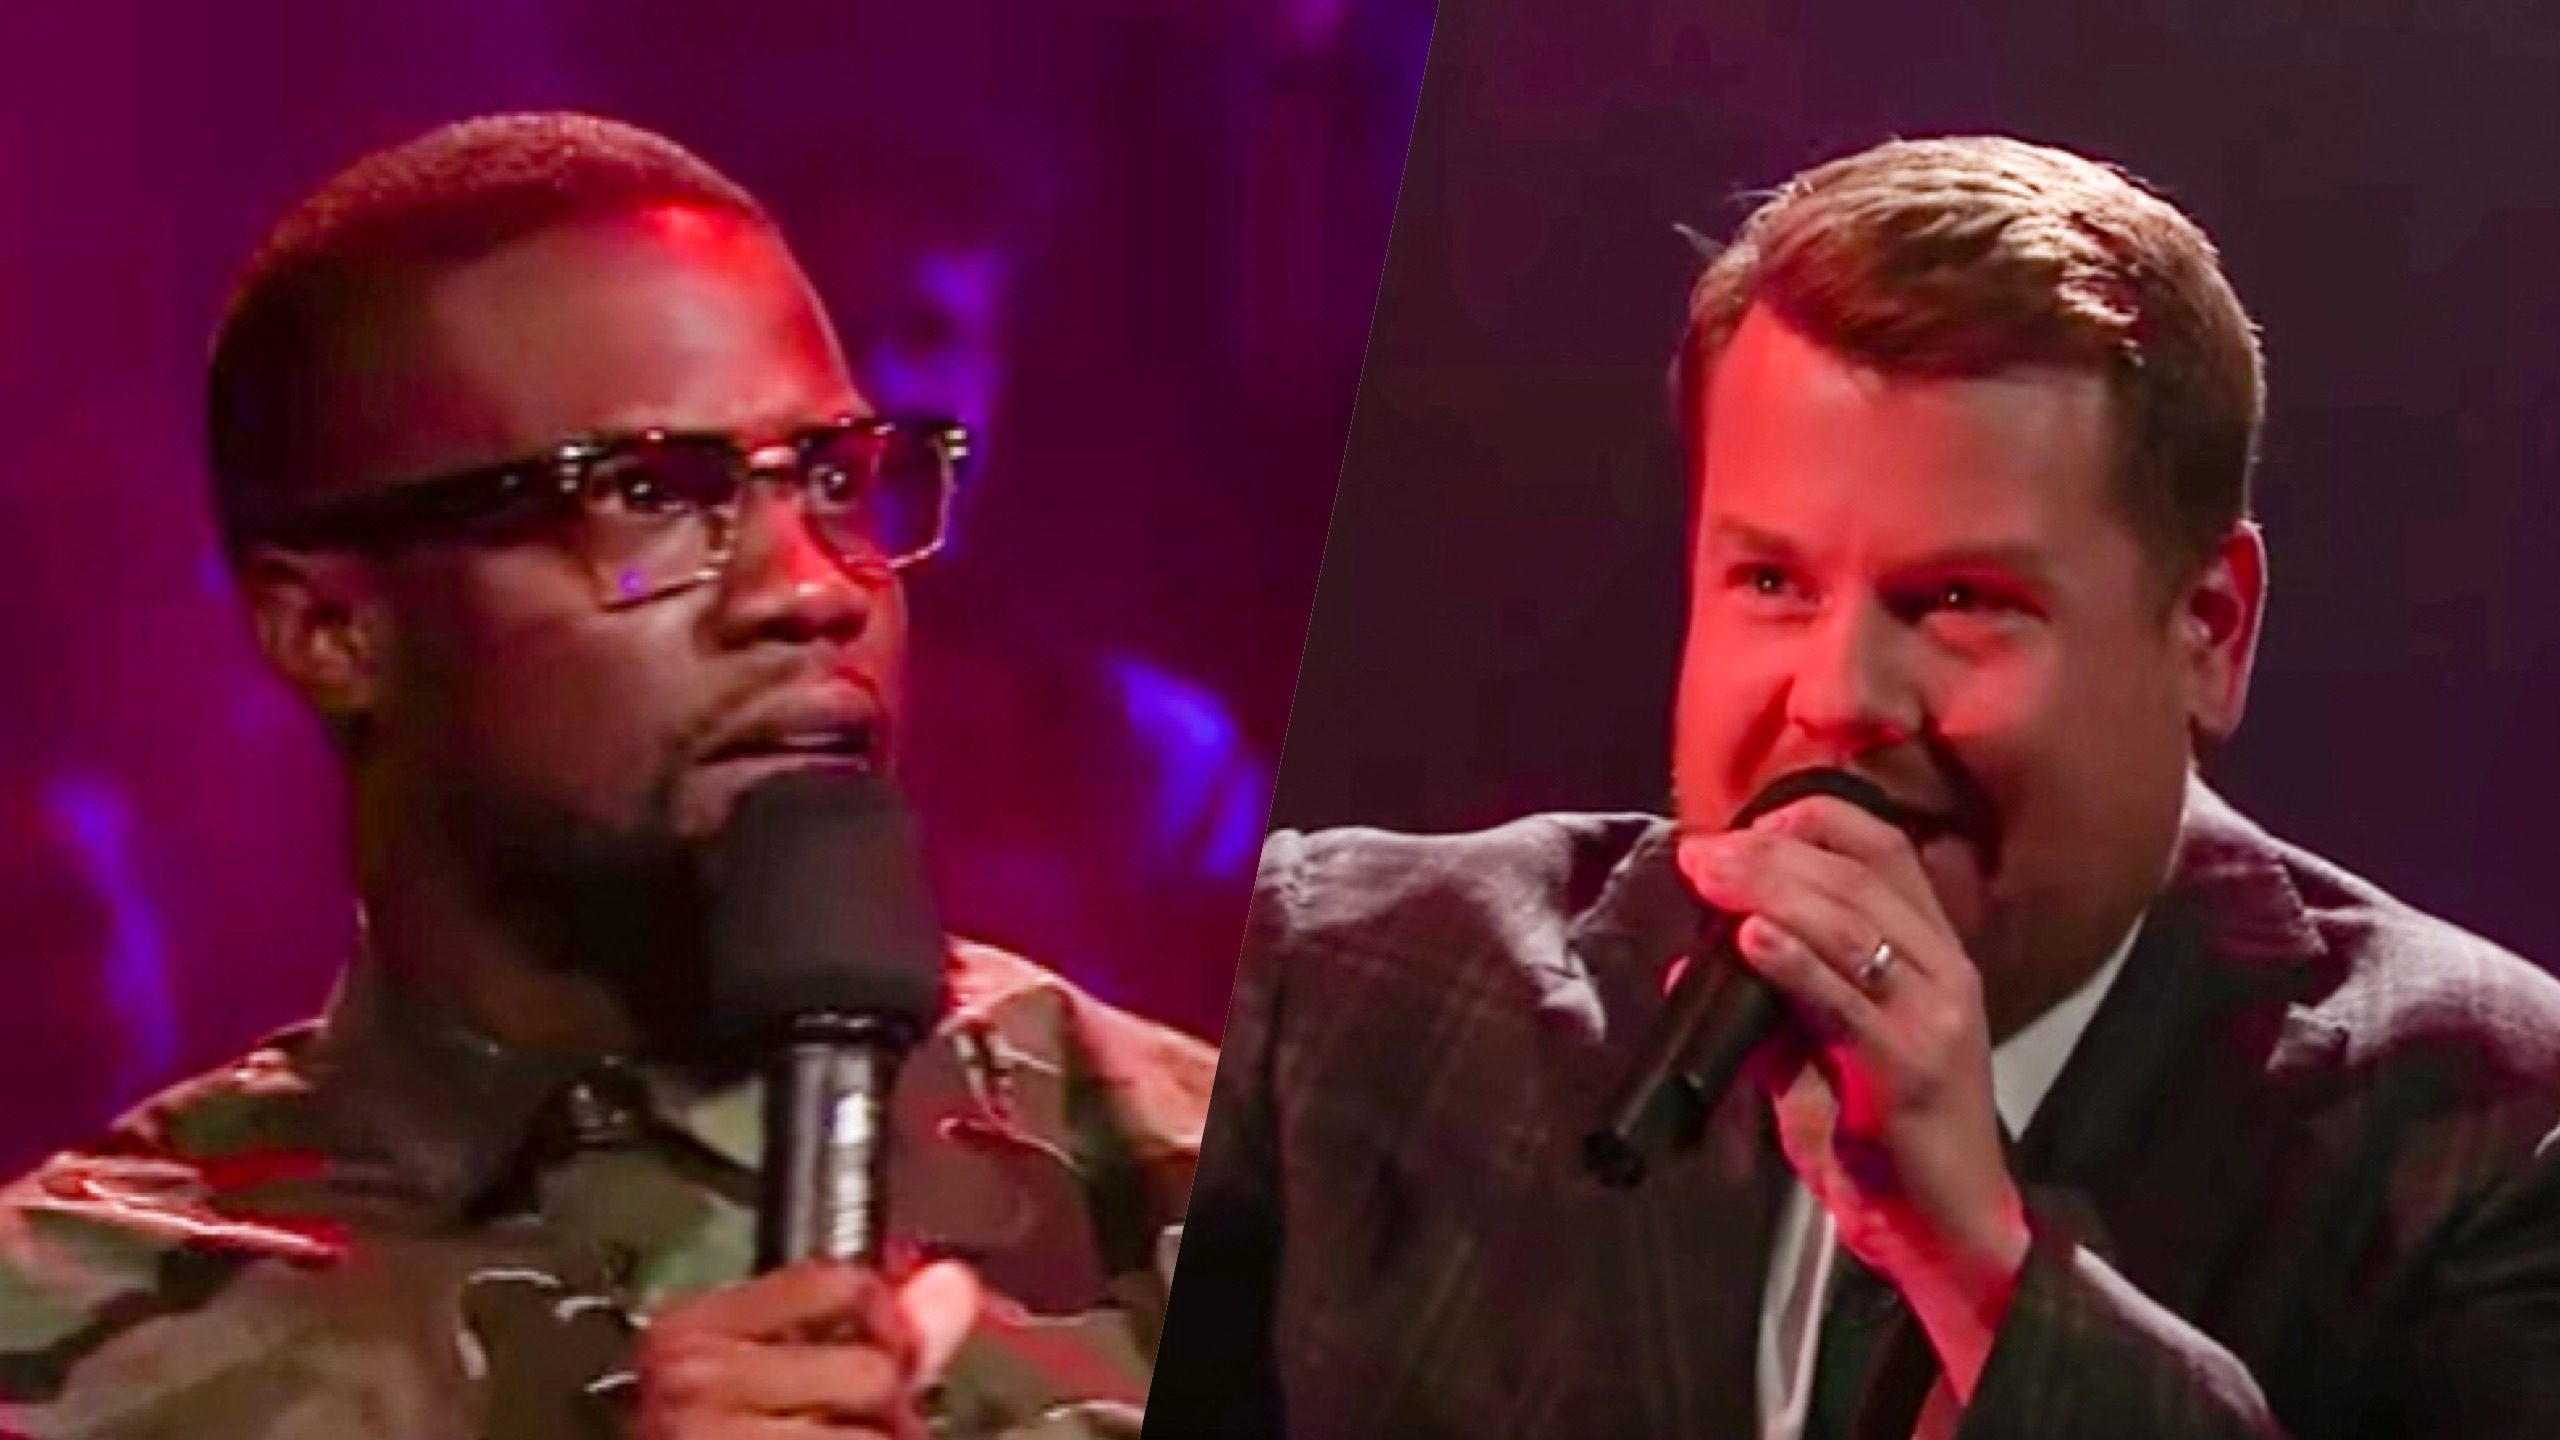 WATCH: Kevin Hart, James Corden’s heated rap battle on ‘Late Late Show’